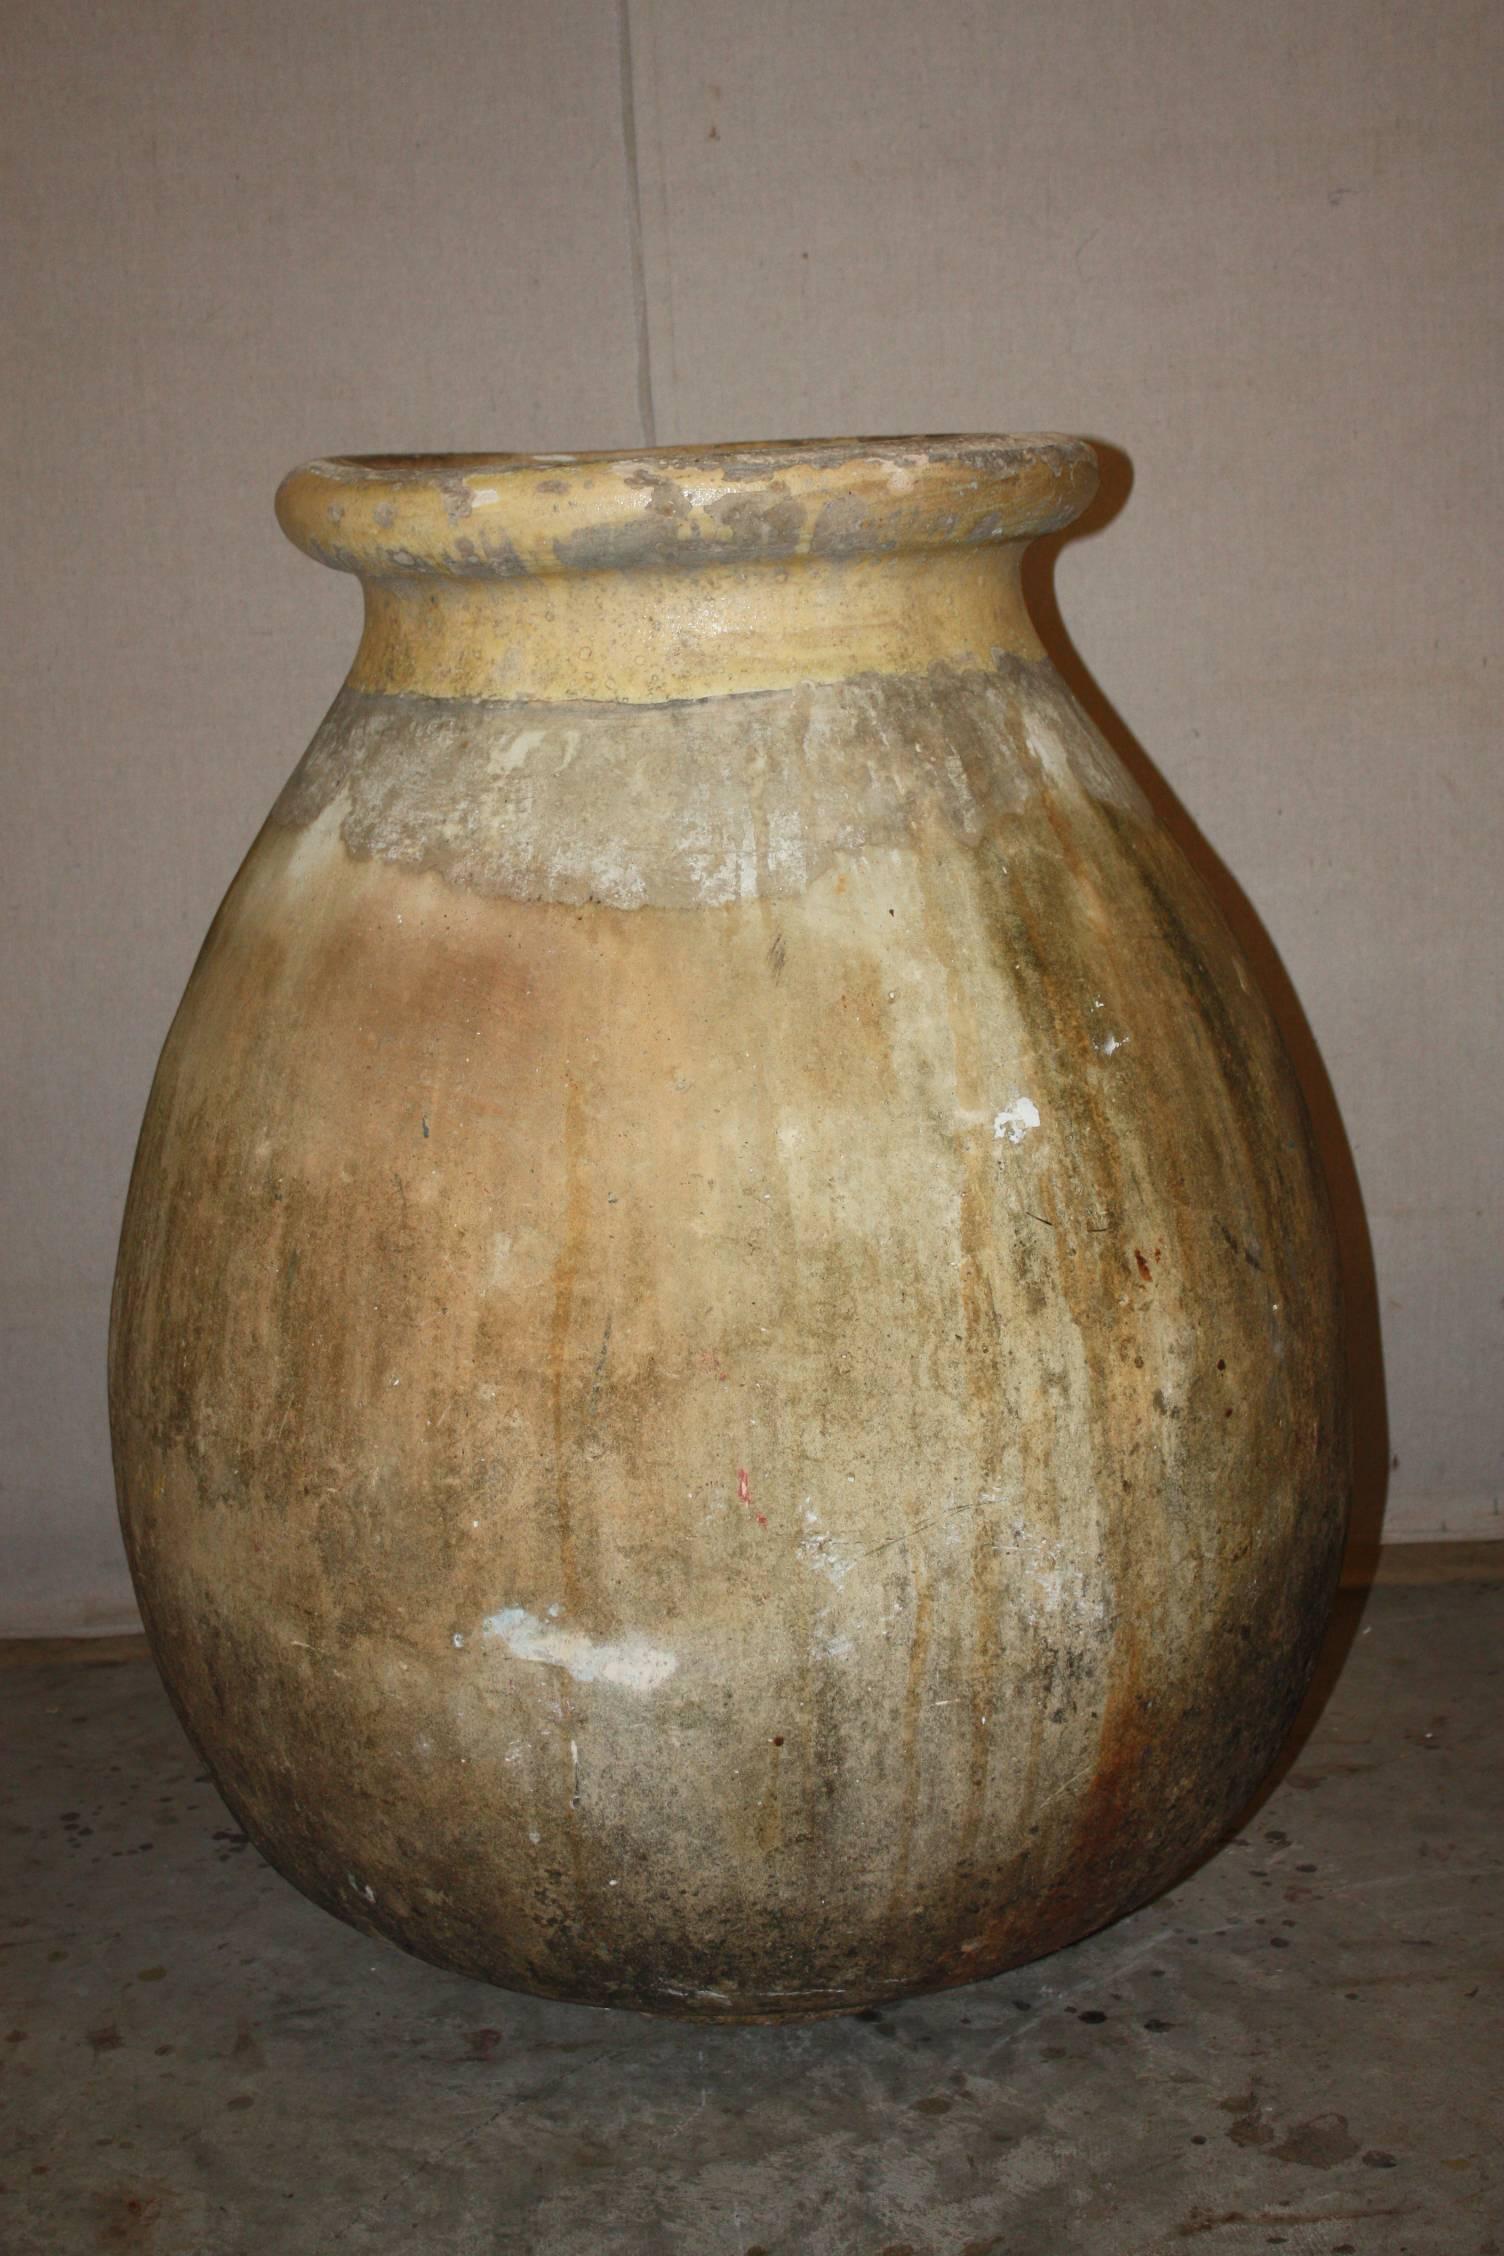 This is a very nice large French olive jar made in Biot, Provence in the early 1800s. It has a nice bulbous shape. The glaze has a rich yellow tone. It is in great shape for its age.